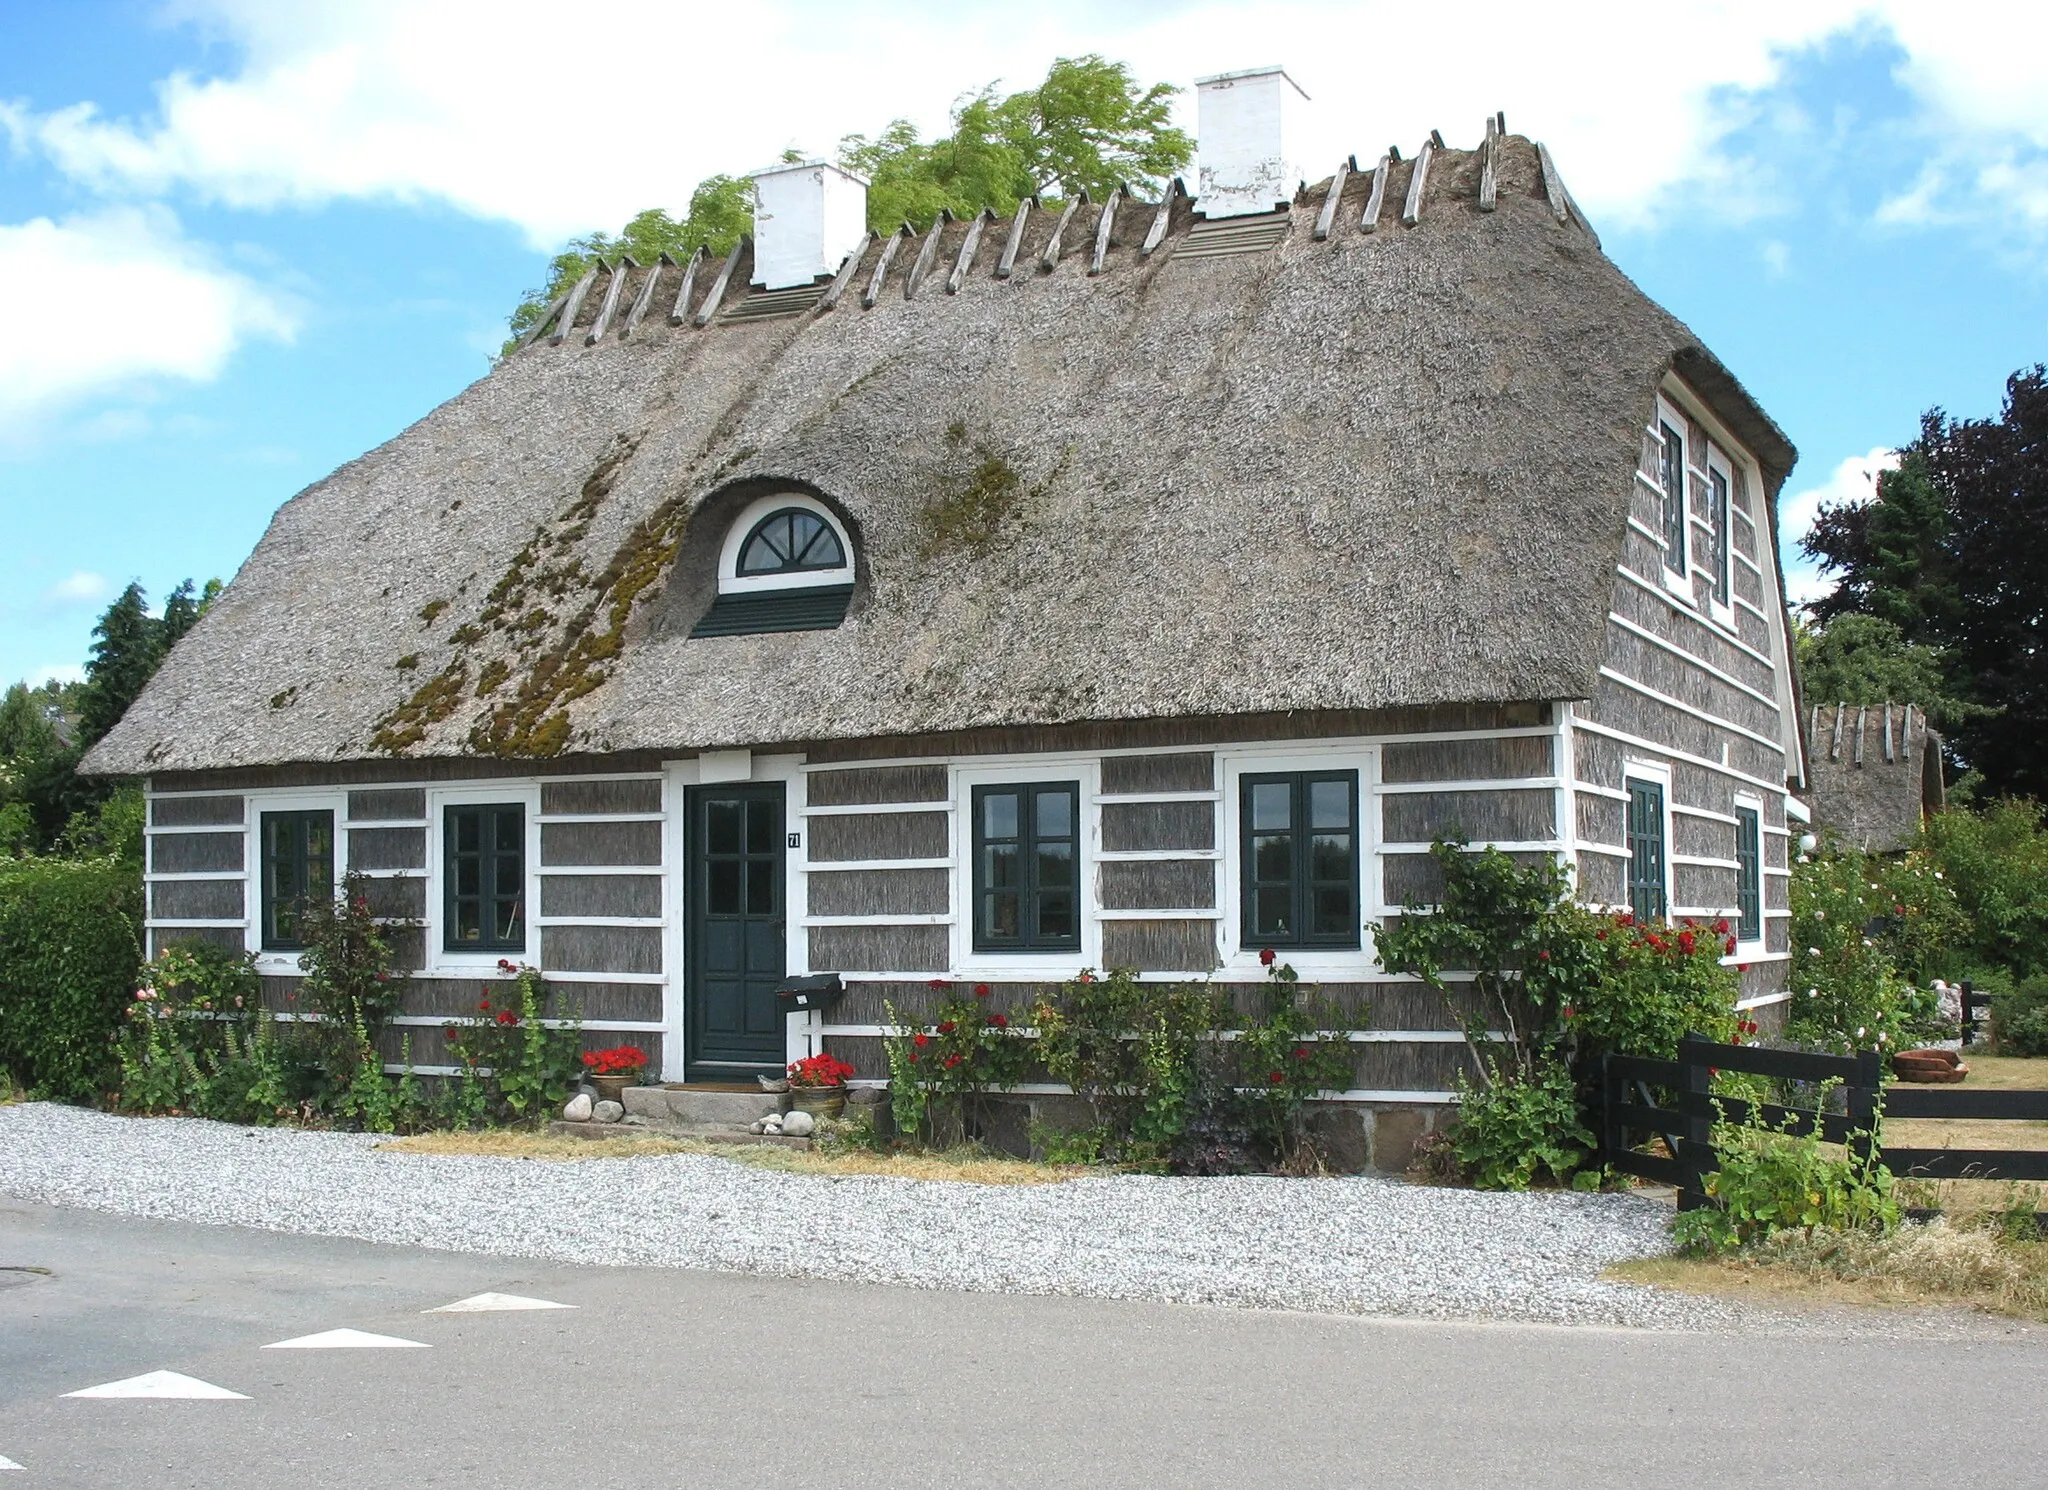 Photo showing: Typical house in the Danish fishing village "Hesnæs". The location is the island Falster in east Denmark.